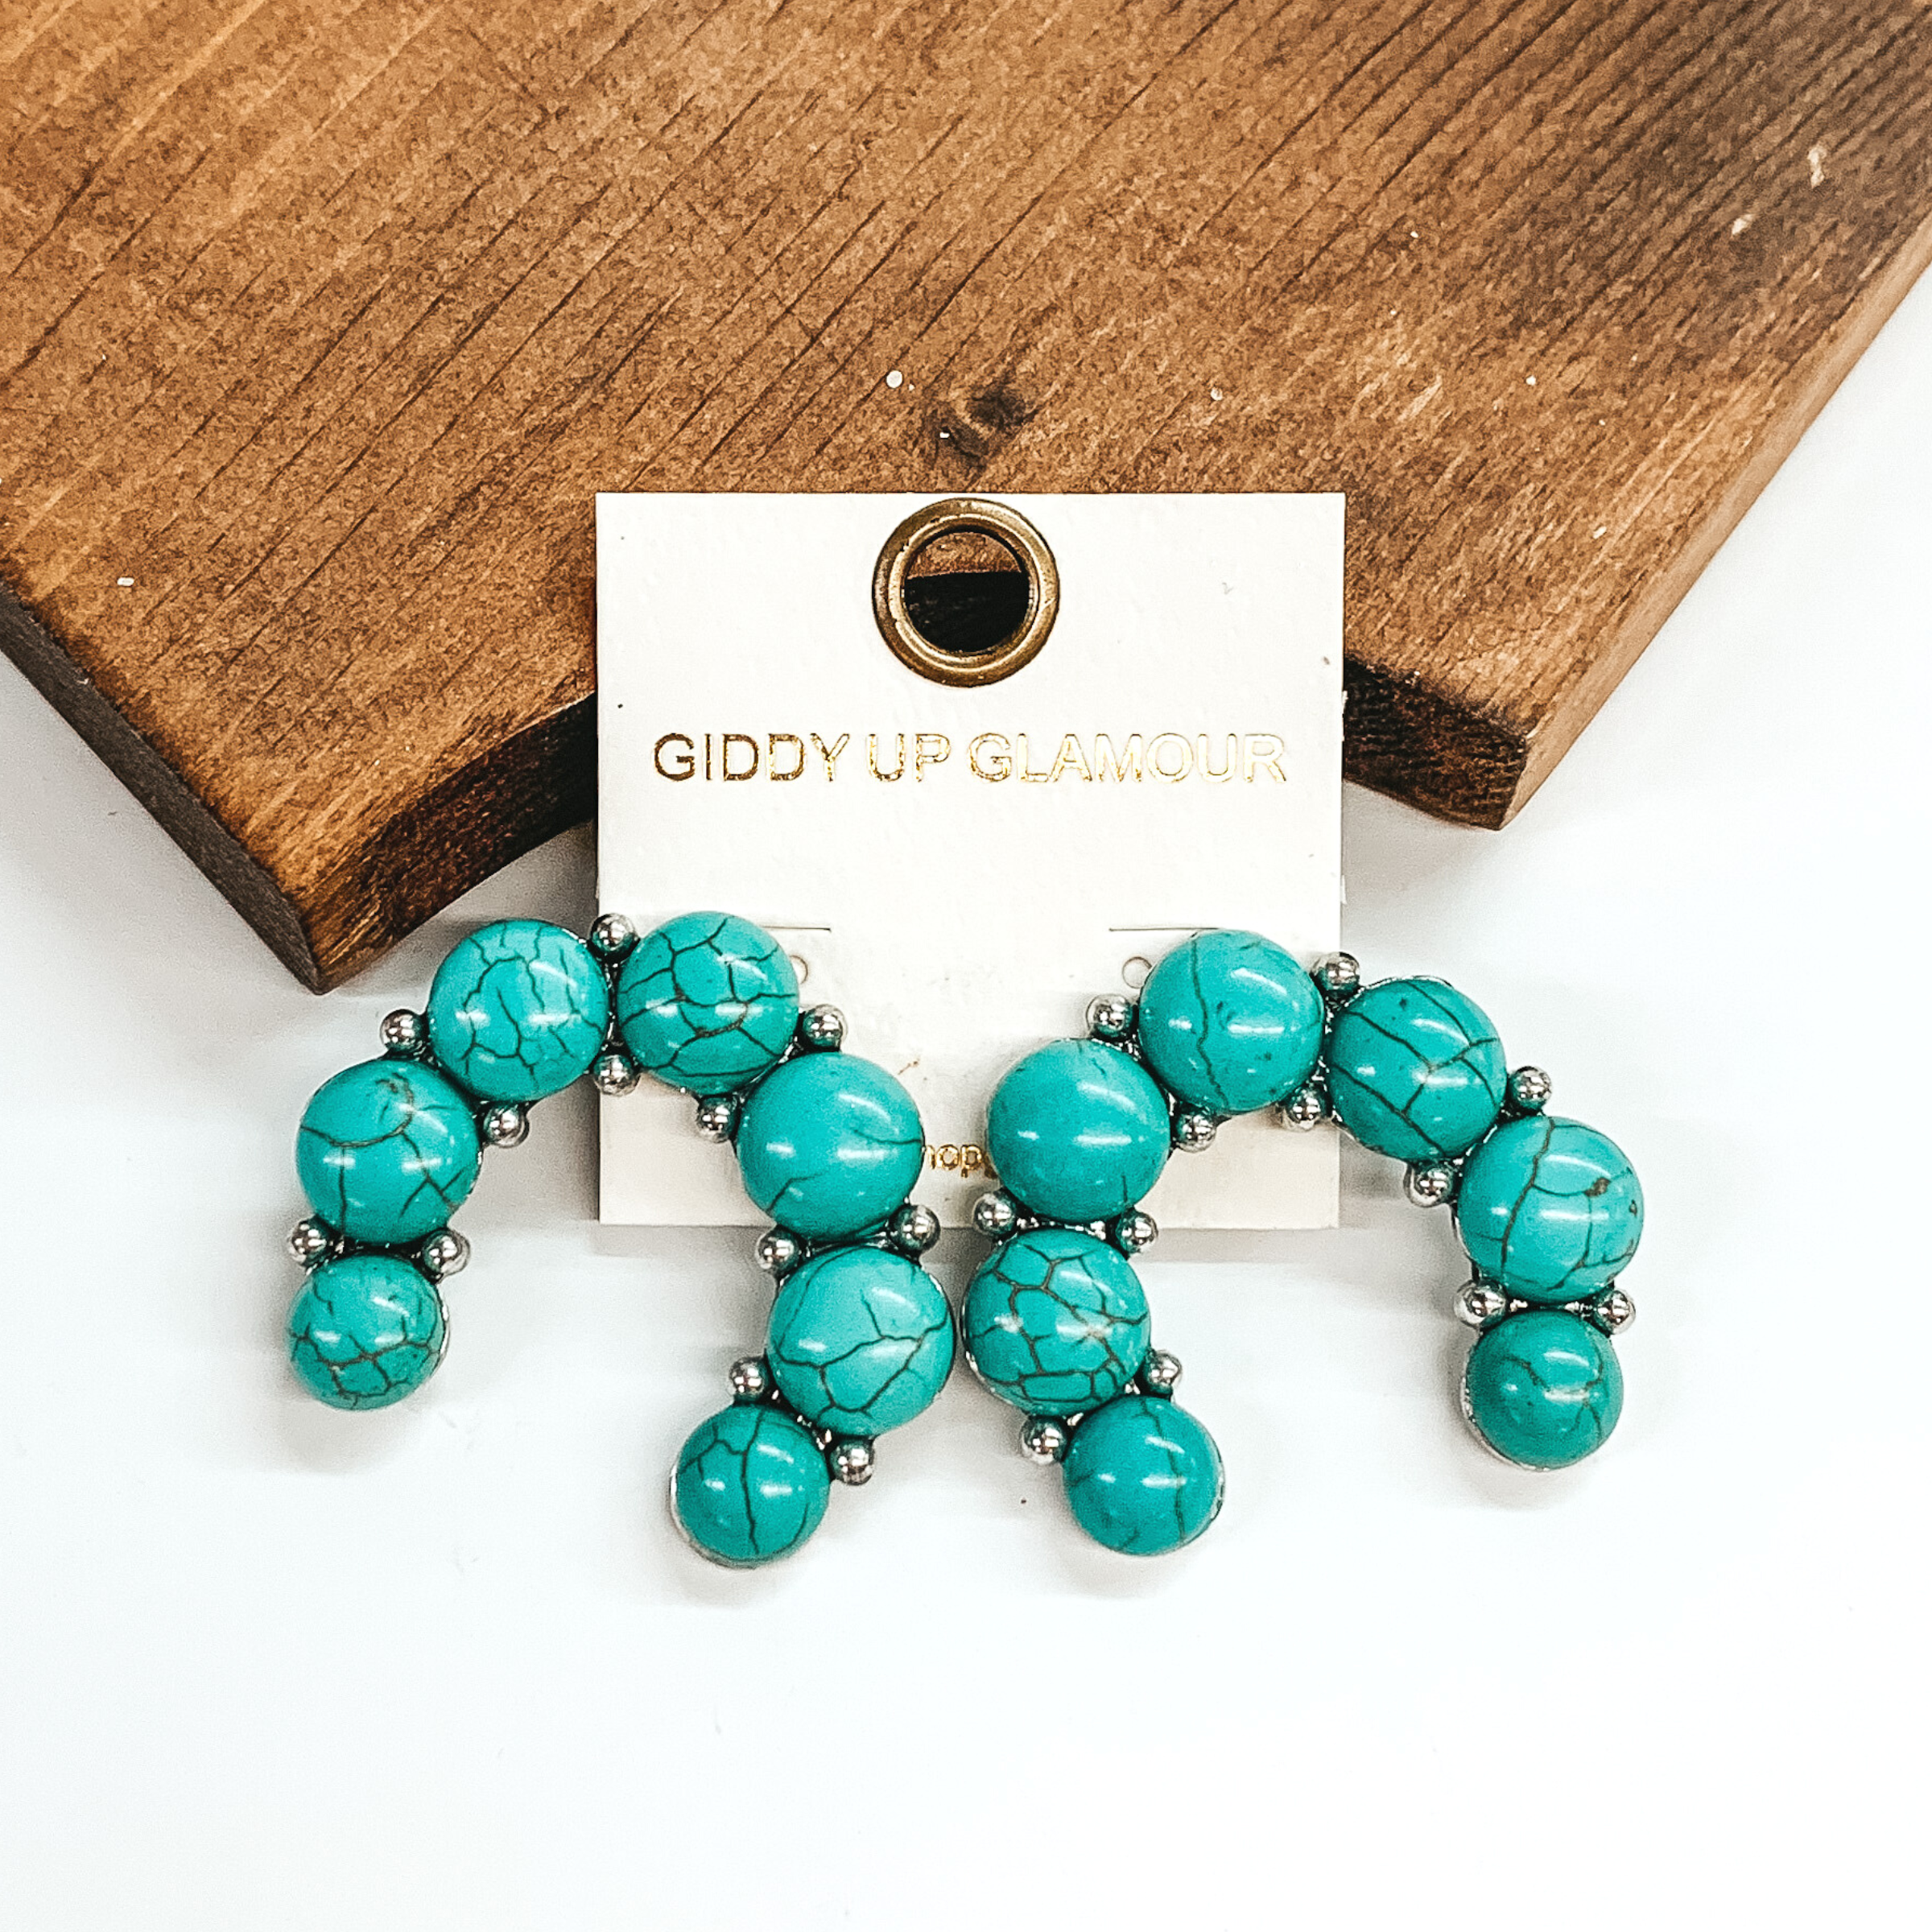 Naja earrings with turquoise stones. These earrings are pictured leaning against a brown block on a white background.